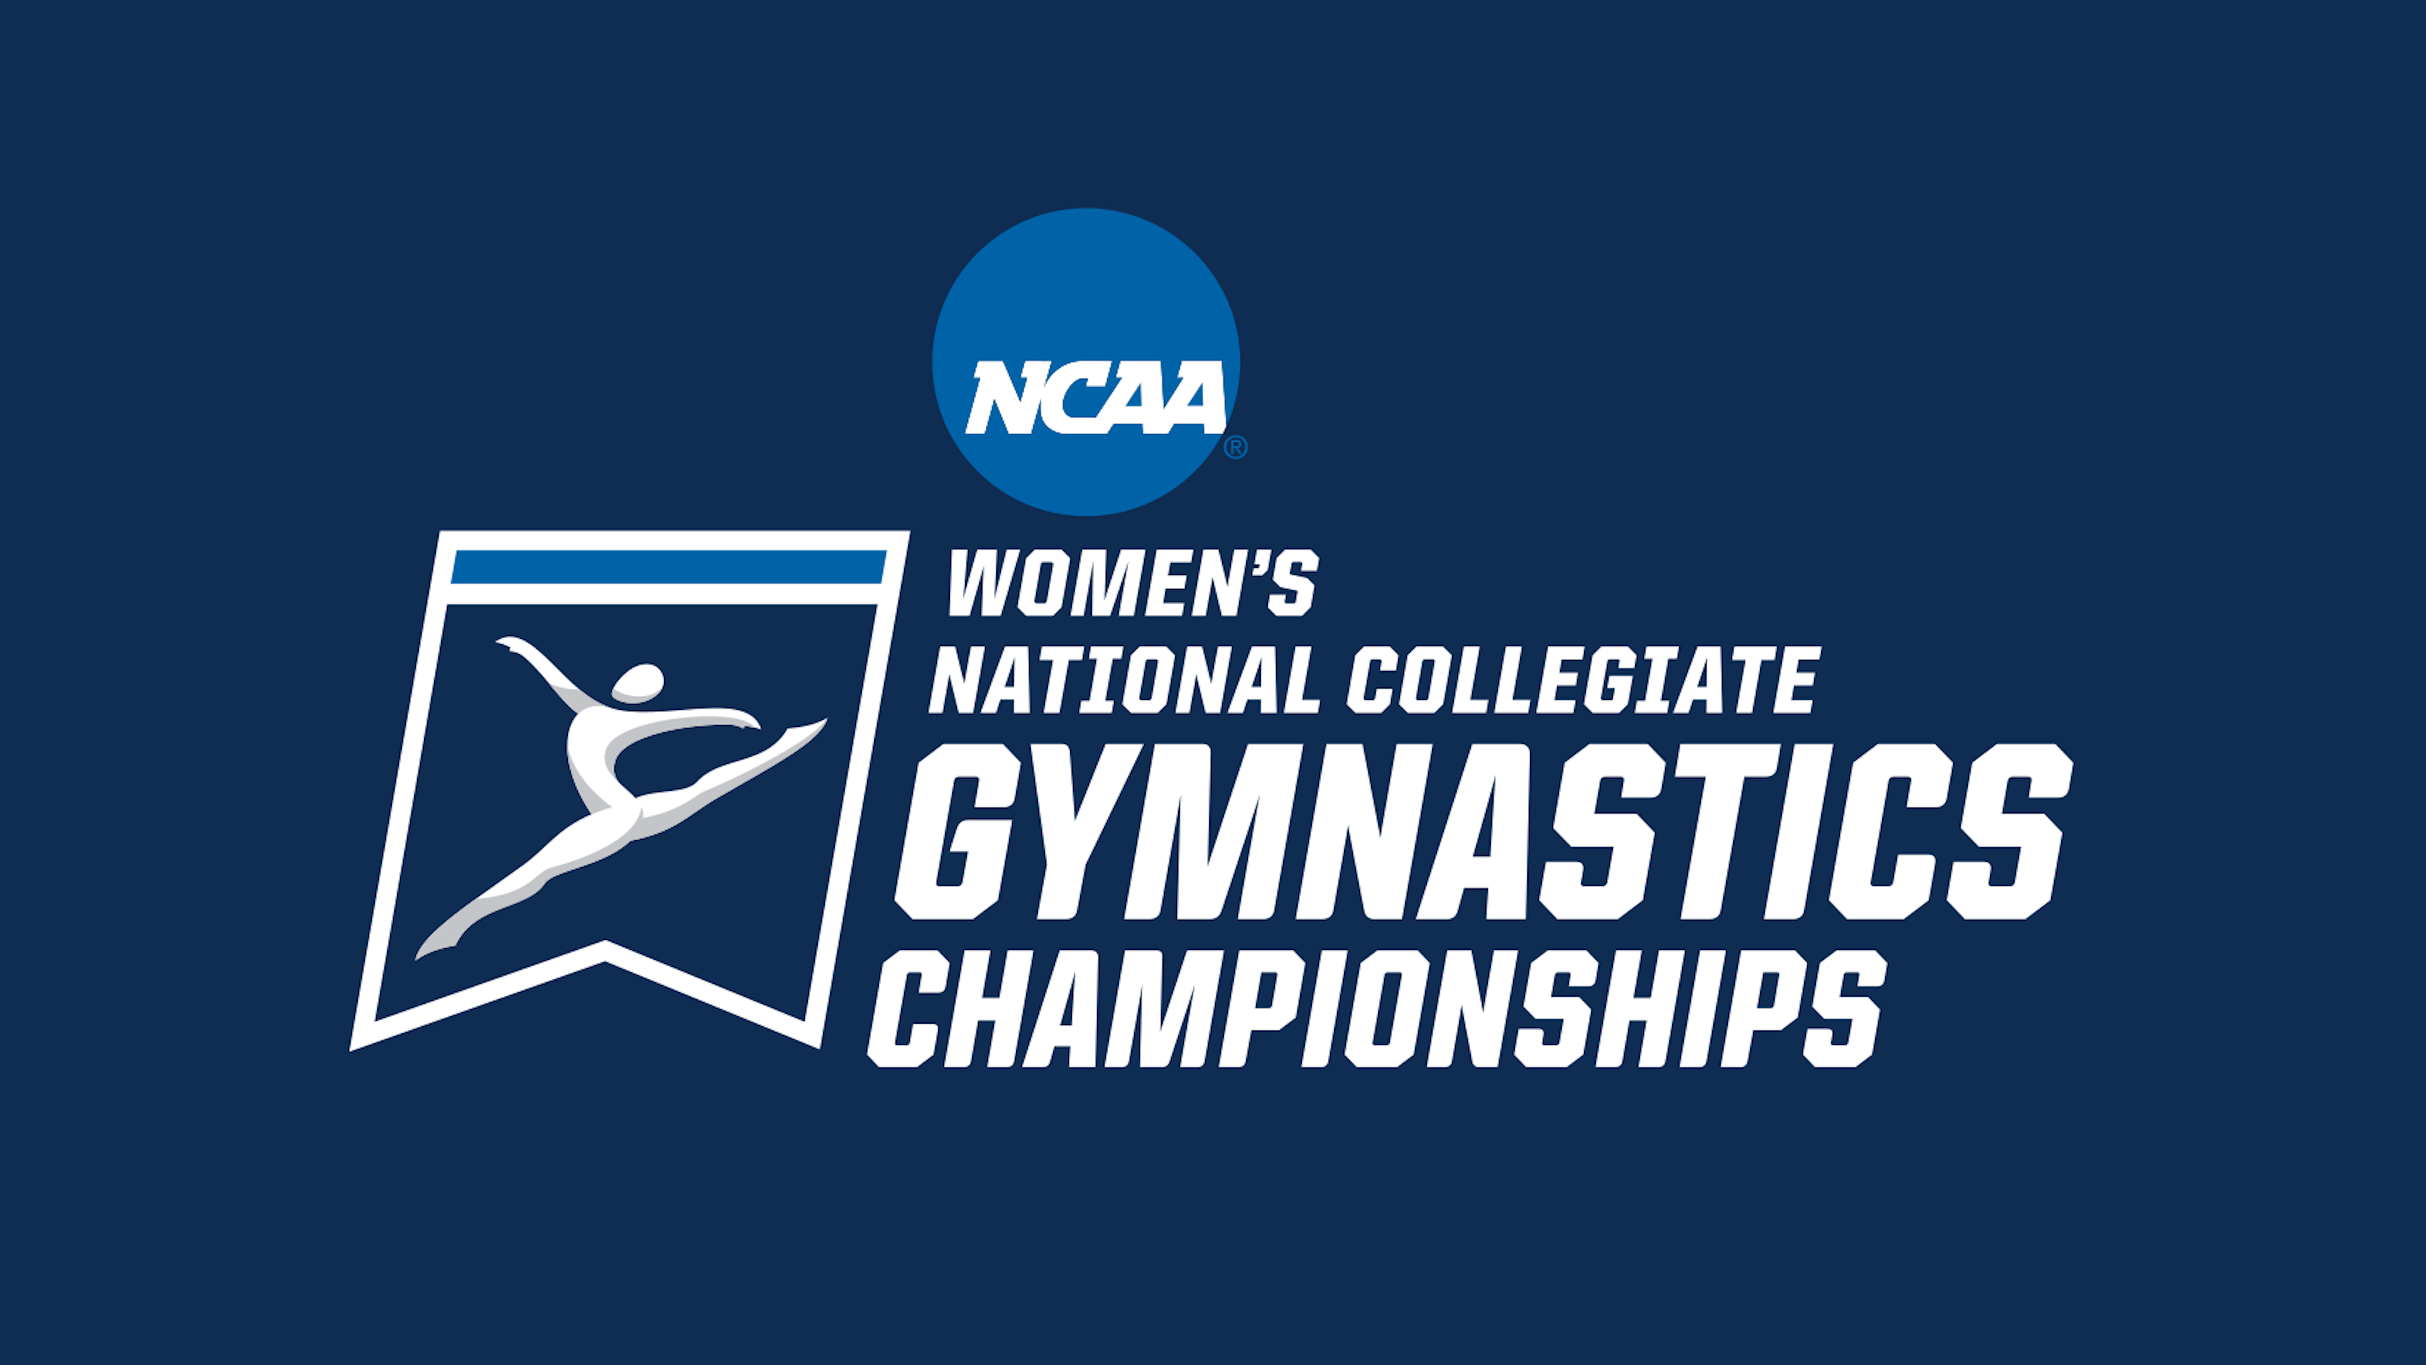 NCAA Women's Gymnastics Championships - Finals in Fort Worth promo photo for Exclusive presale offer code